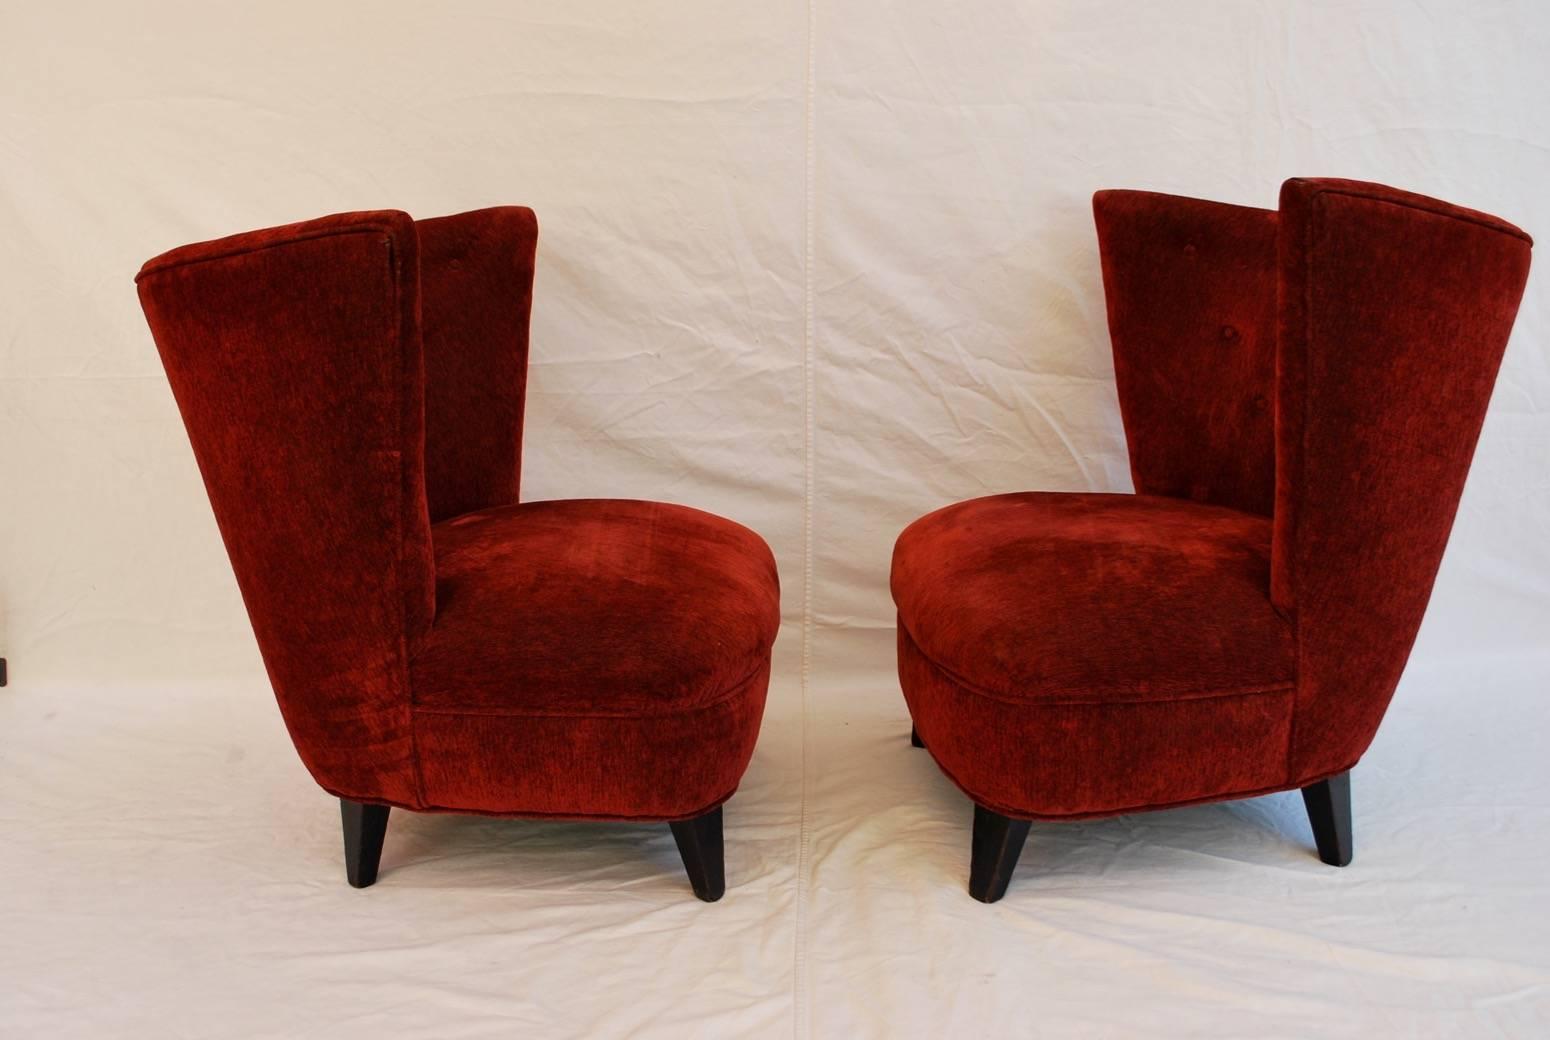 Art Deco Glamorous Pair of 1940 Lounge Slipper Chairs by Gilbert Rohde